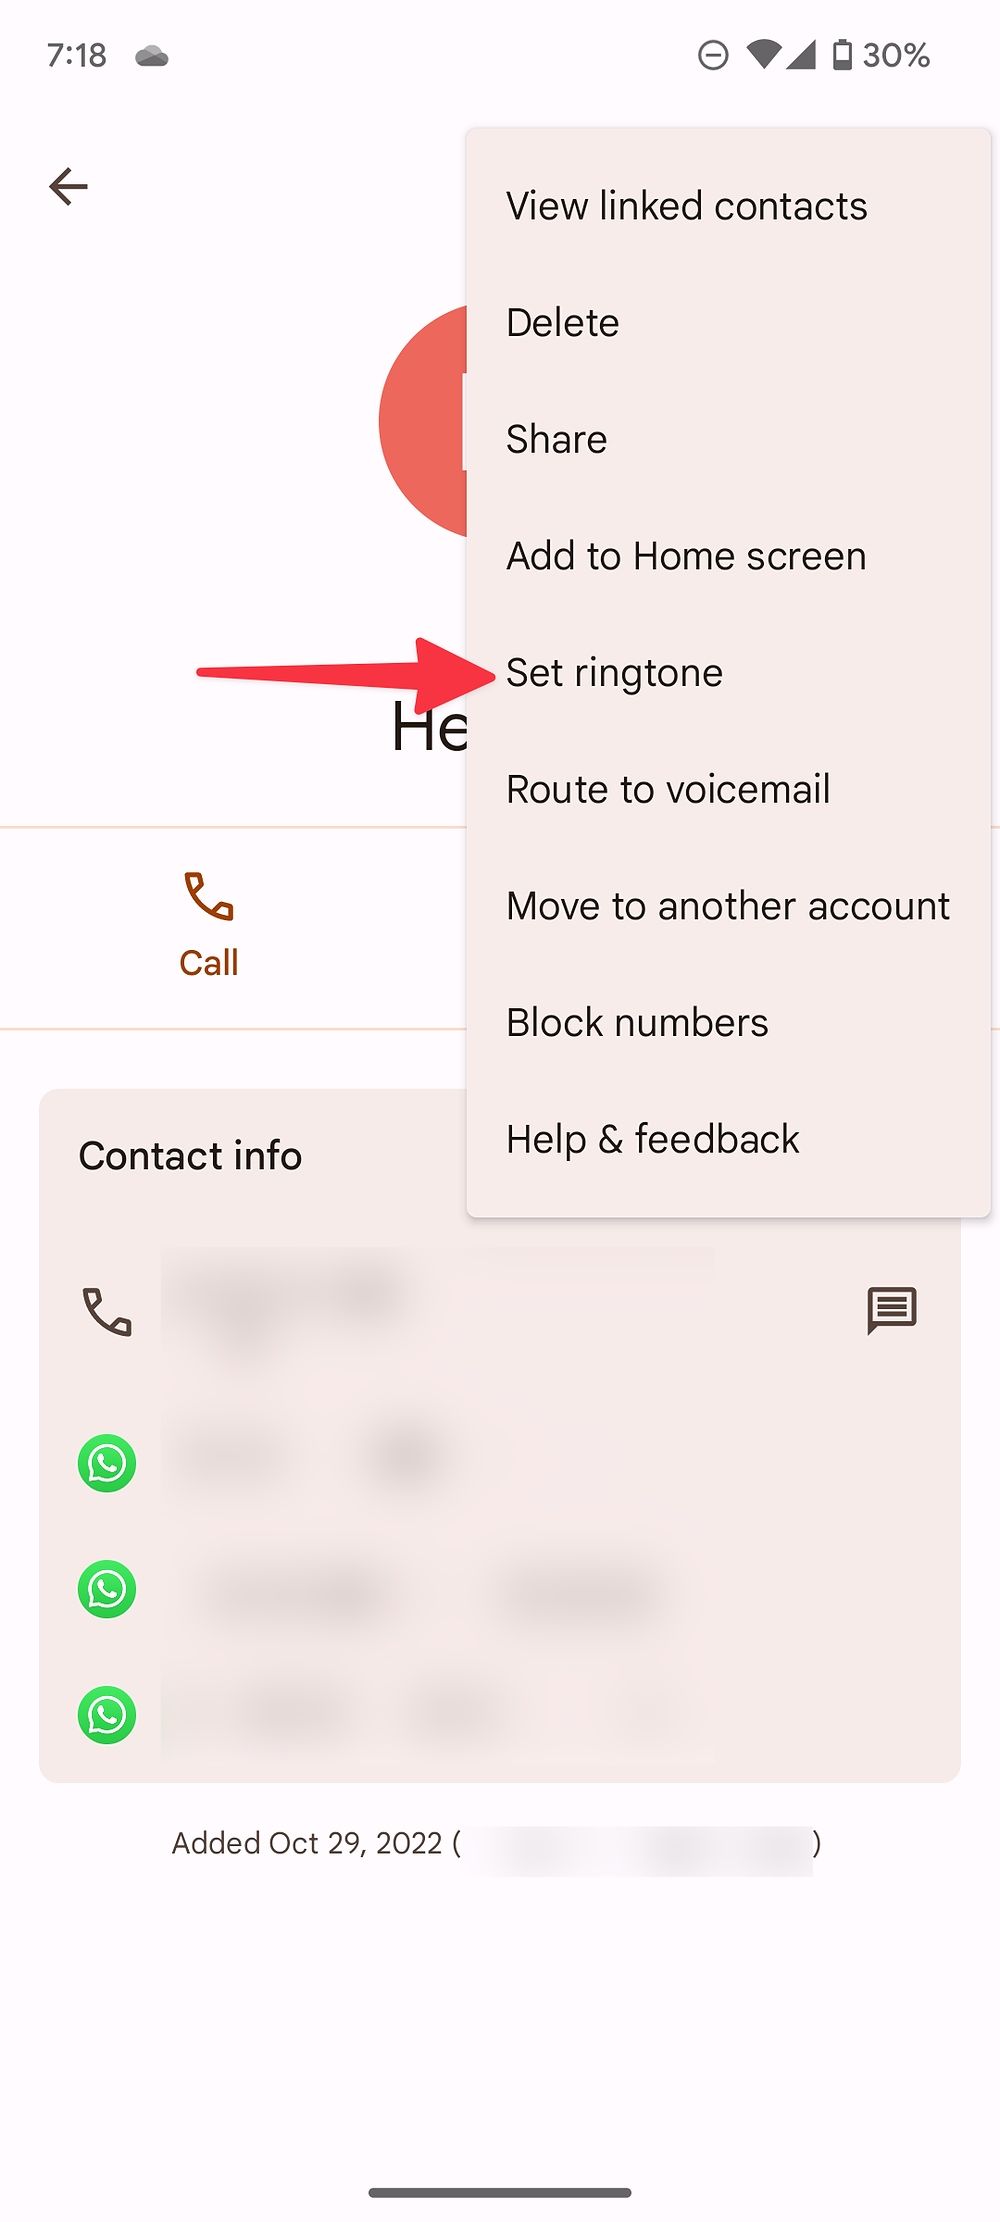 Screenshot shows the triple-dot menu drop down for a specific contact on android. An arrow points to the 'Set ringtone' option.